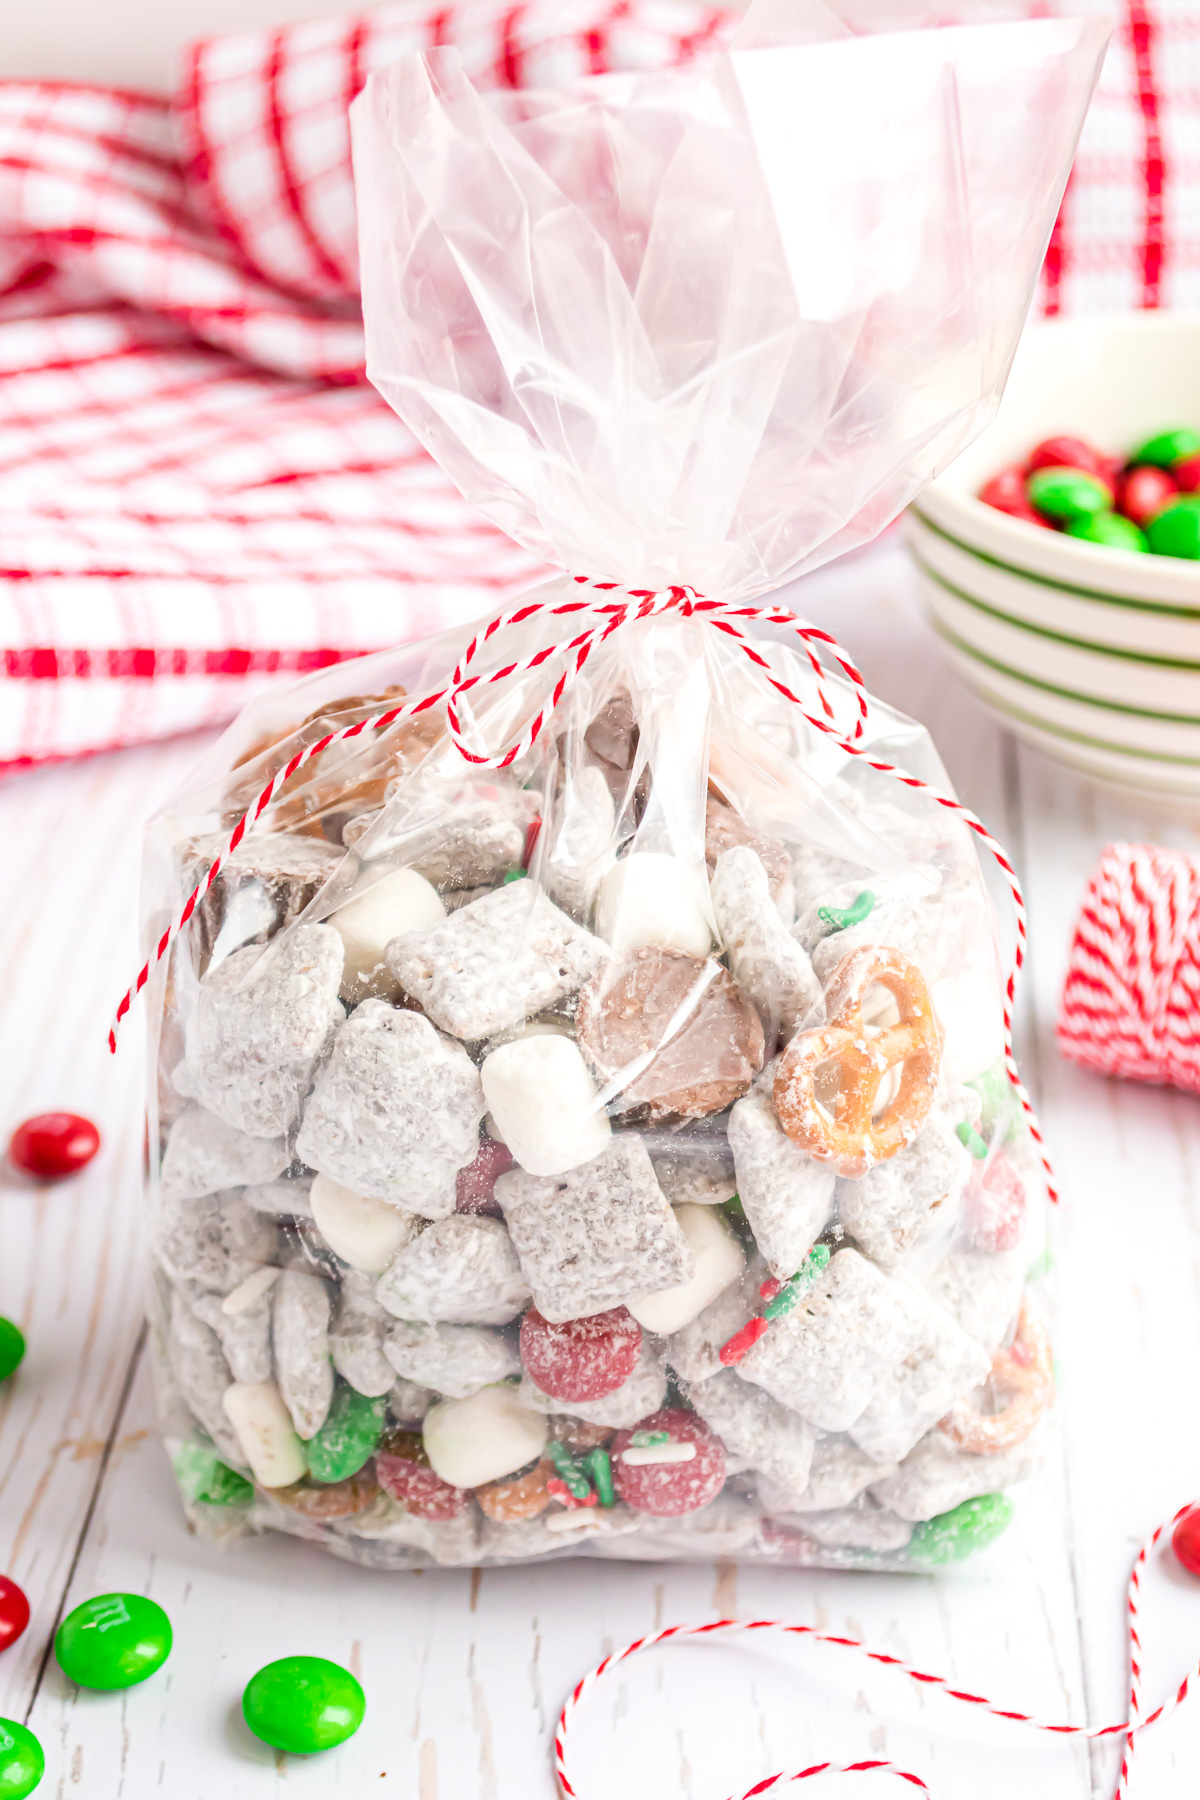 Reindeer Chex mix in a cellophane bag with red and white baker's twine tied in a bow.